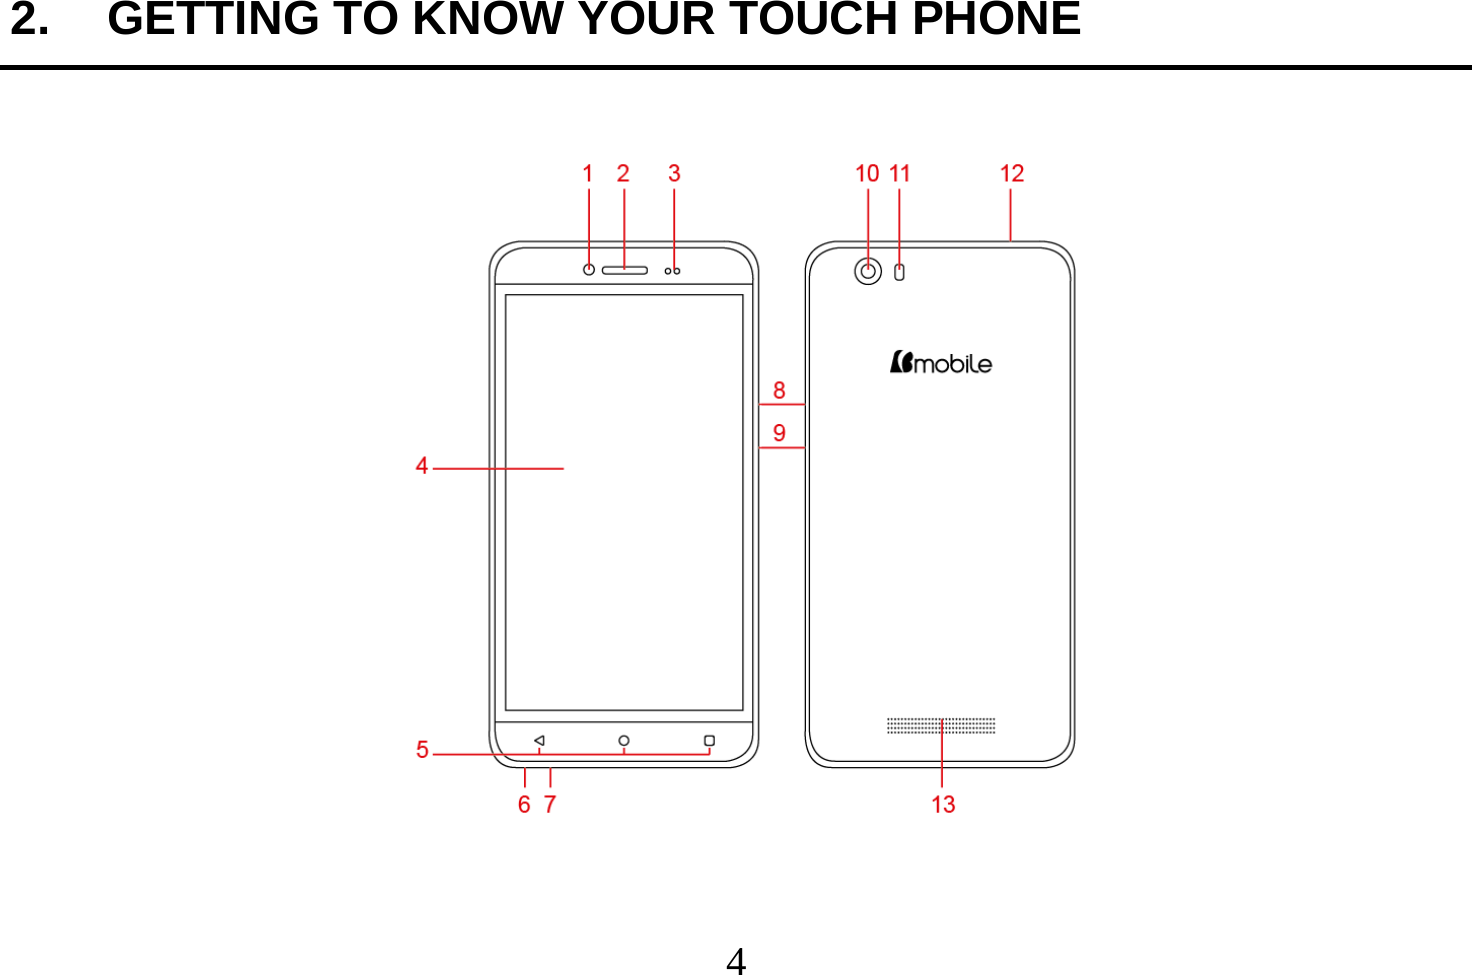  4  2.  GETTING TO KNOW YOUR TOUCH PHONE      